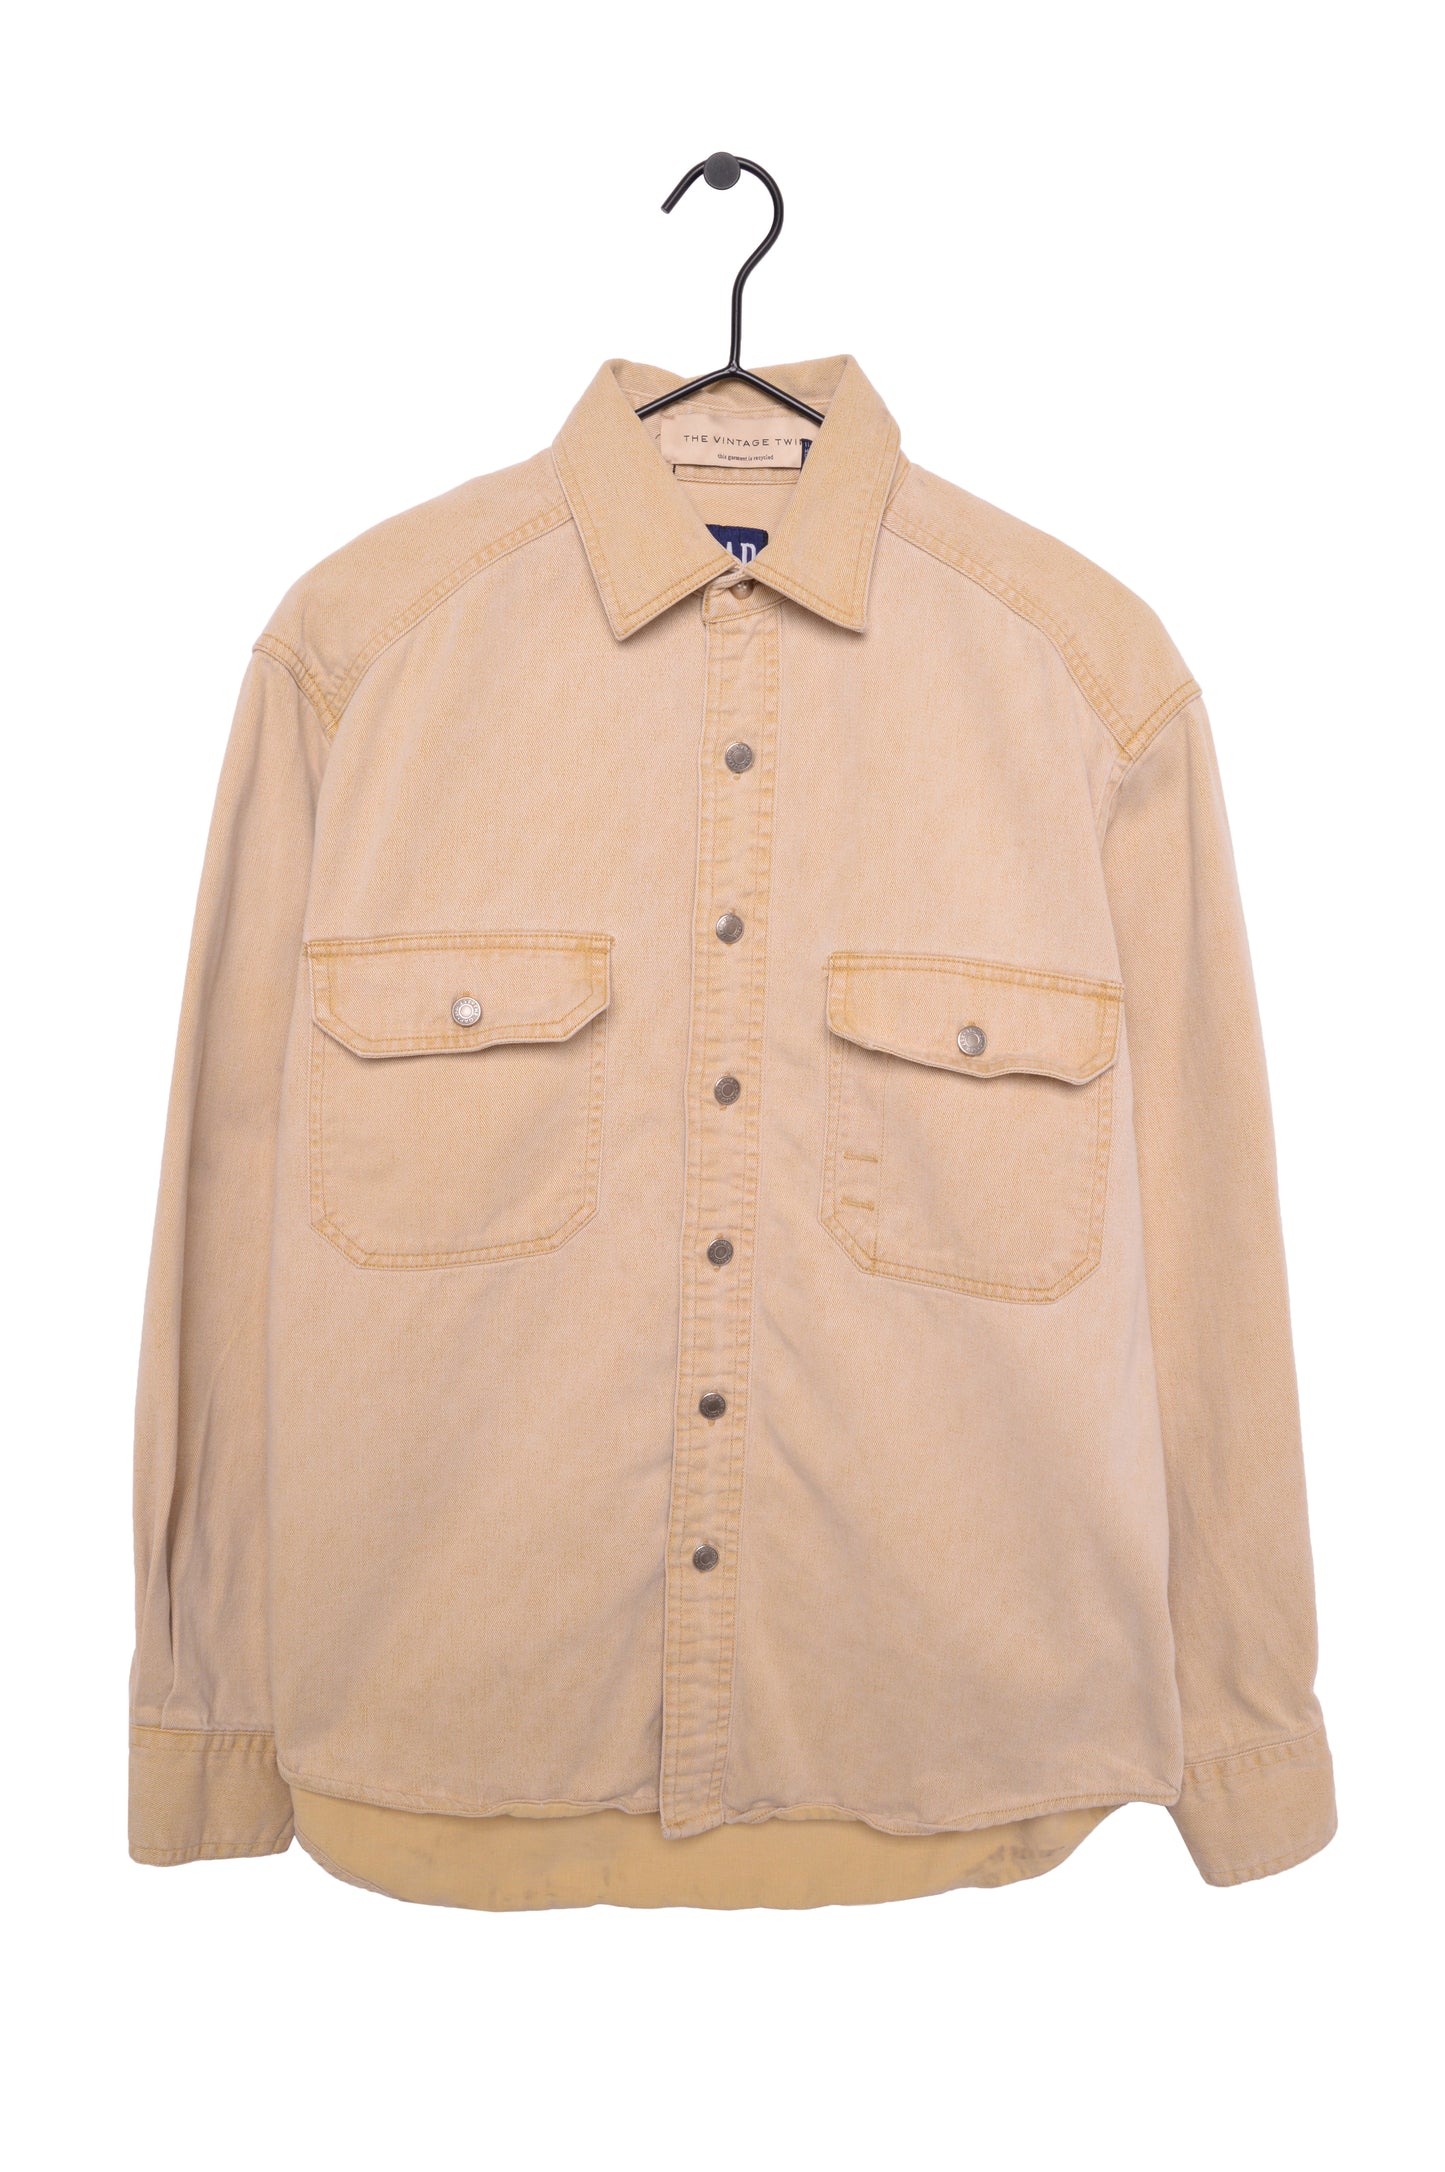 1990s Faded Gap Button Down